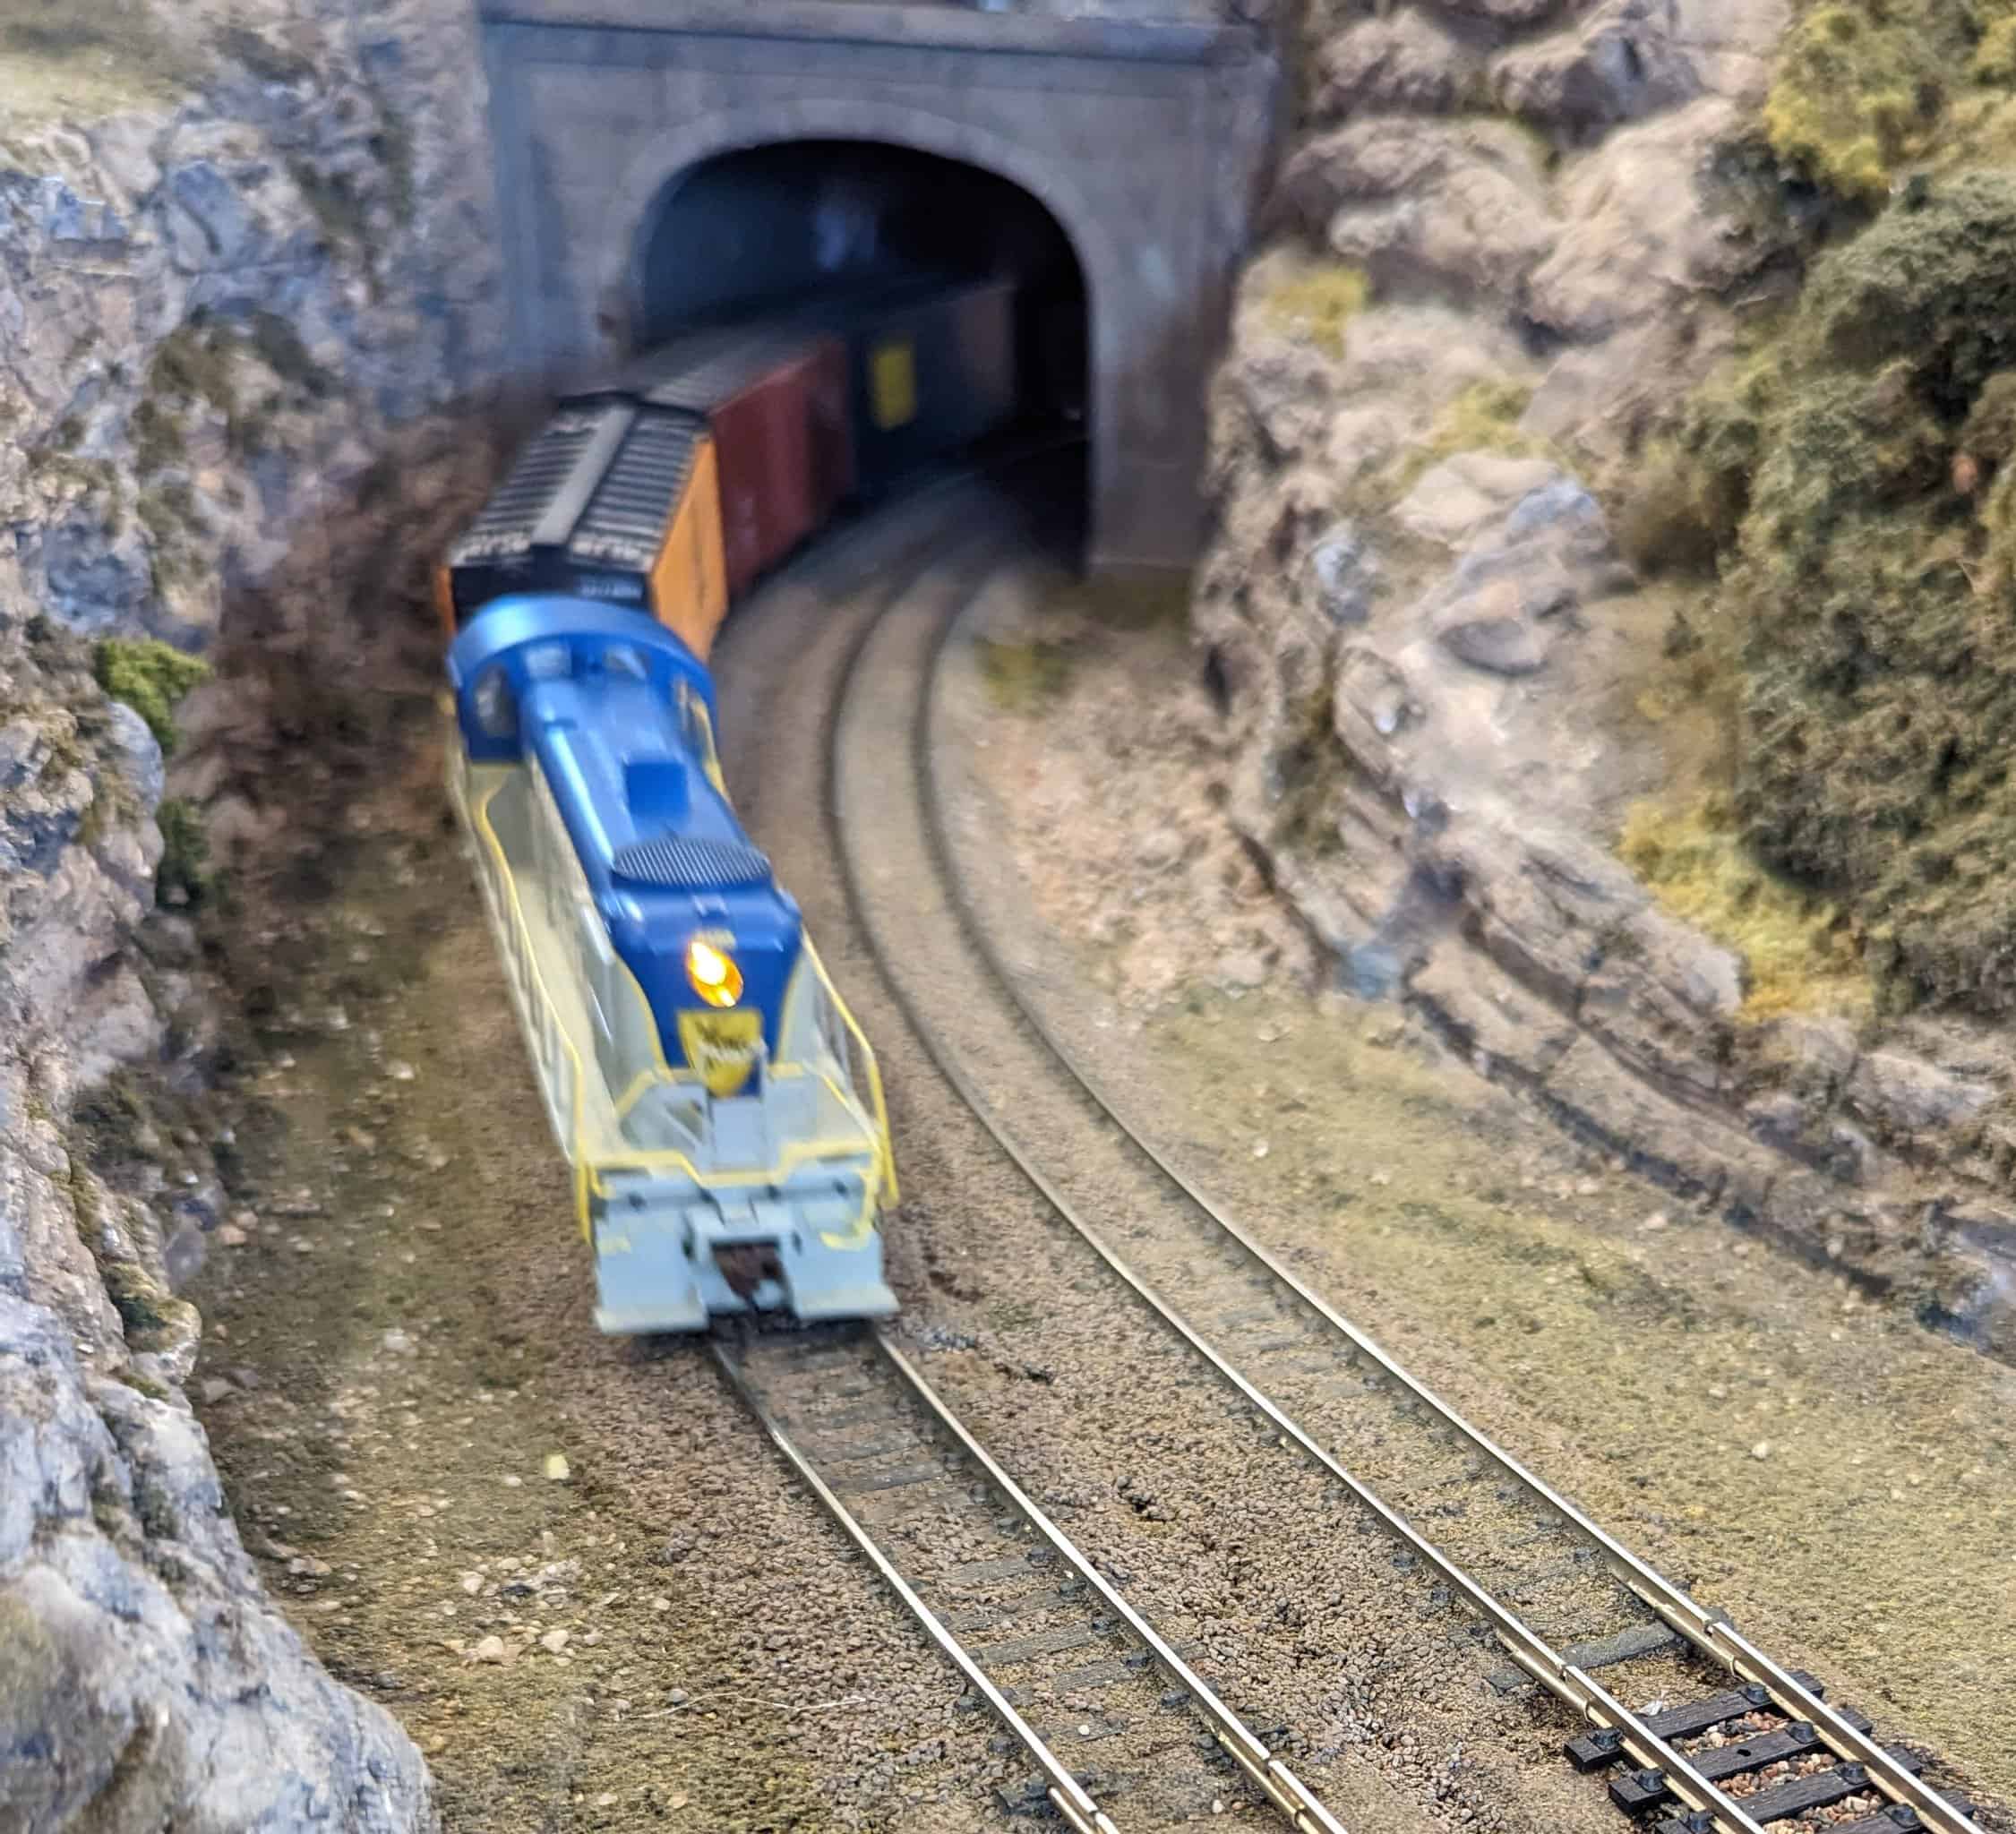 Catch the Model Trains at the Westford Museum!